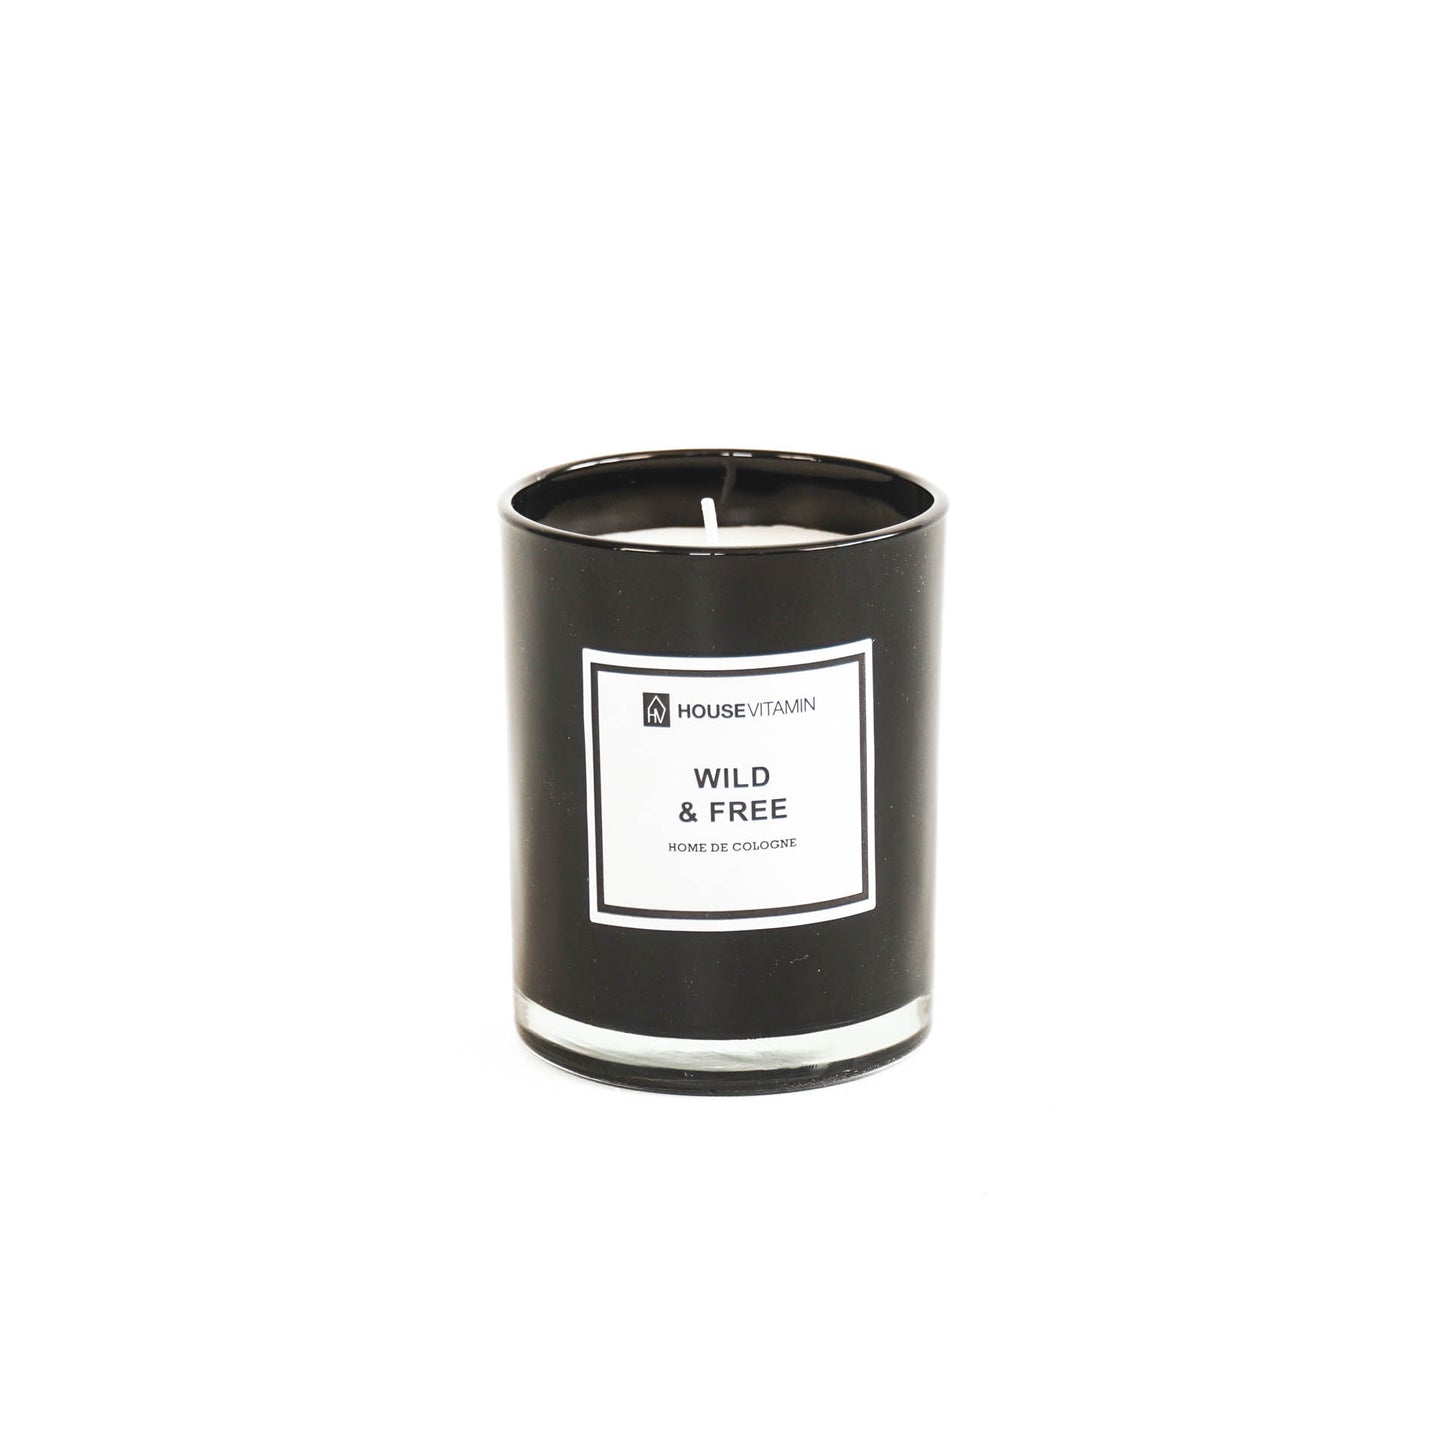 HV Home de Cologne Scented Candle - 250gr - Wild and free